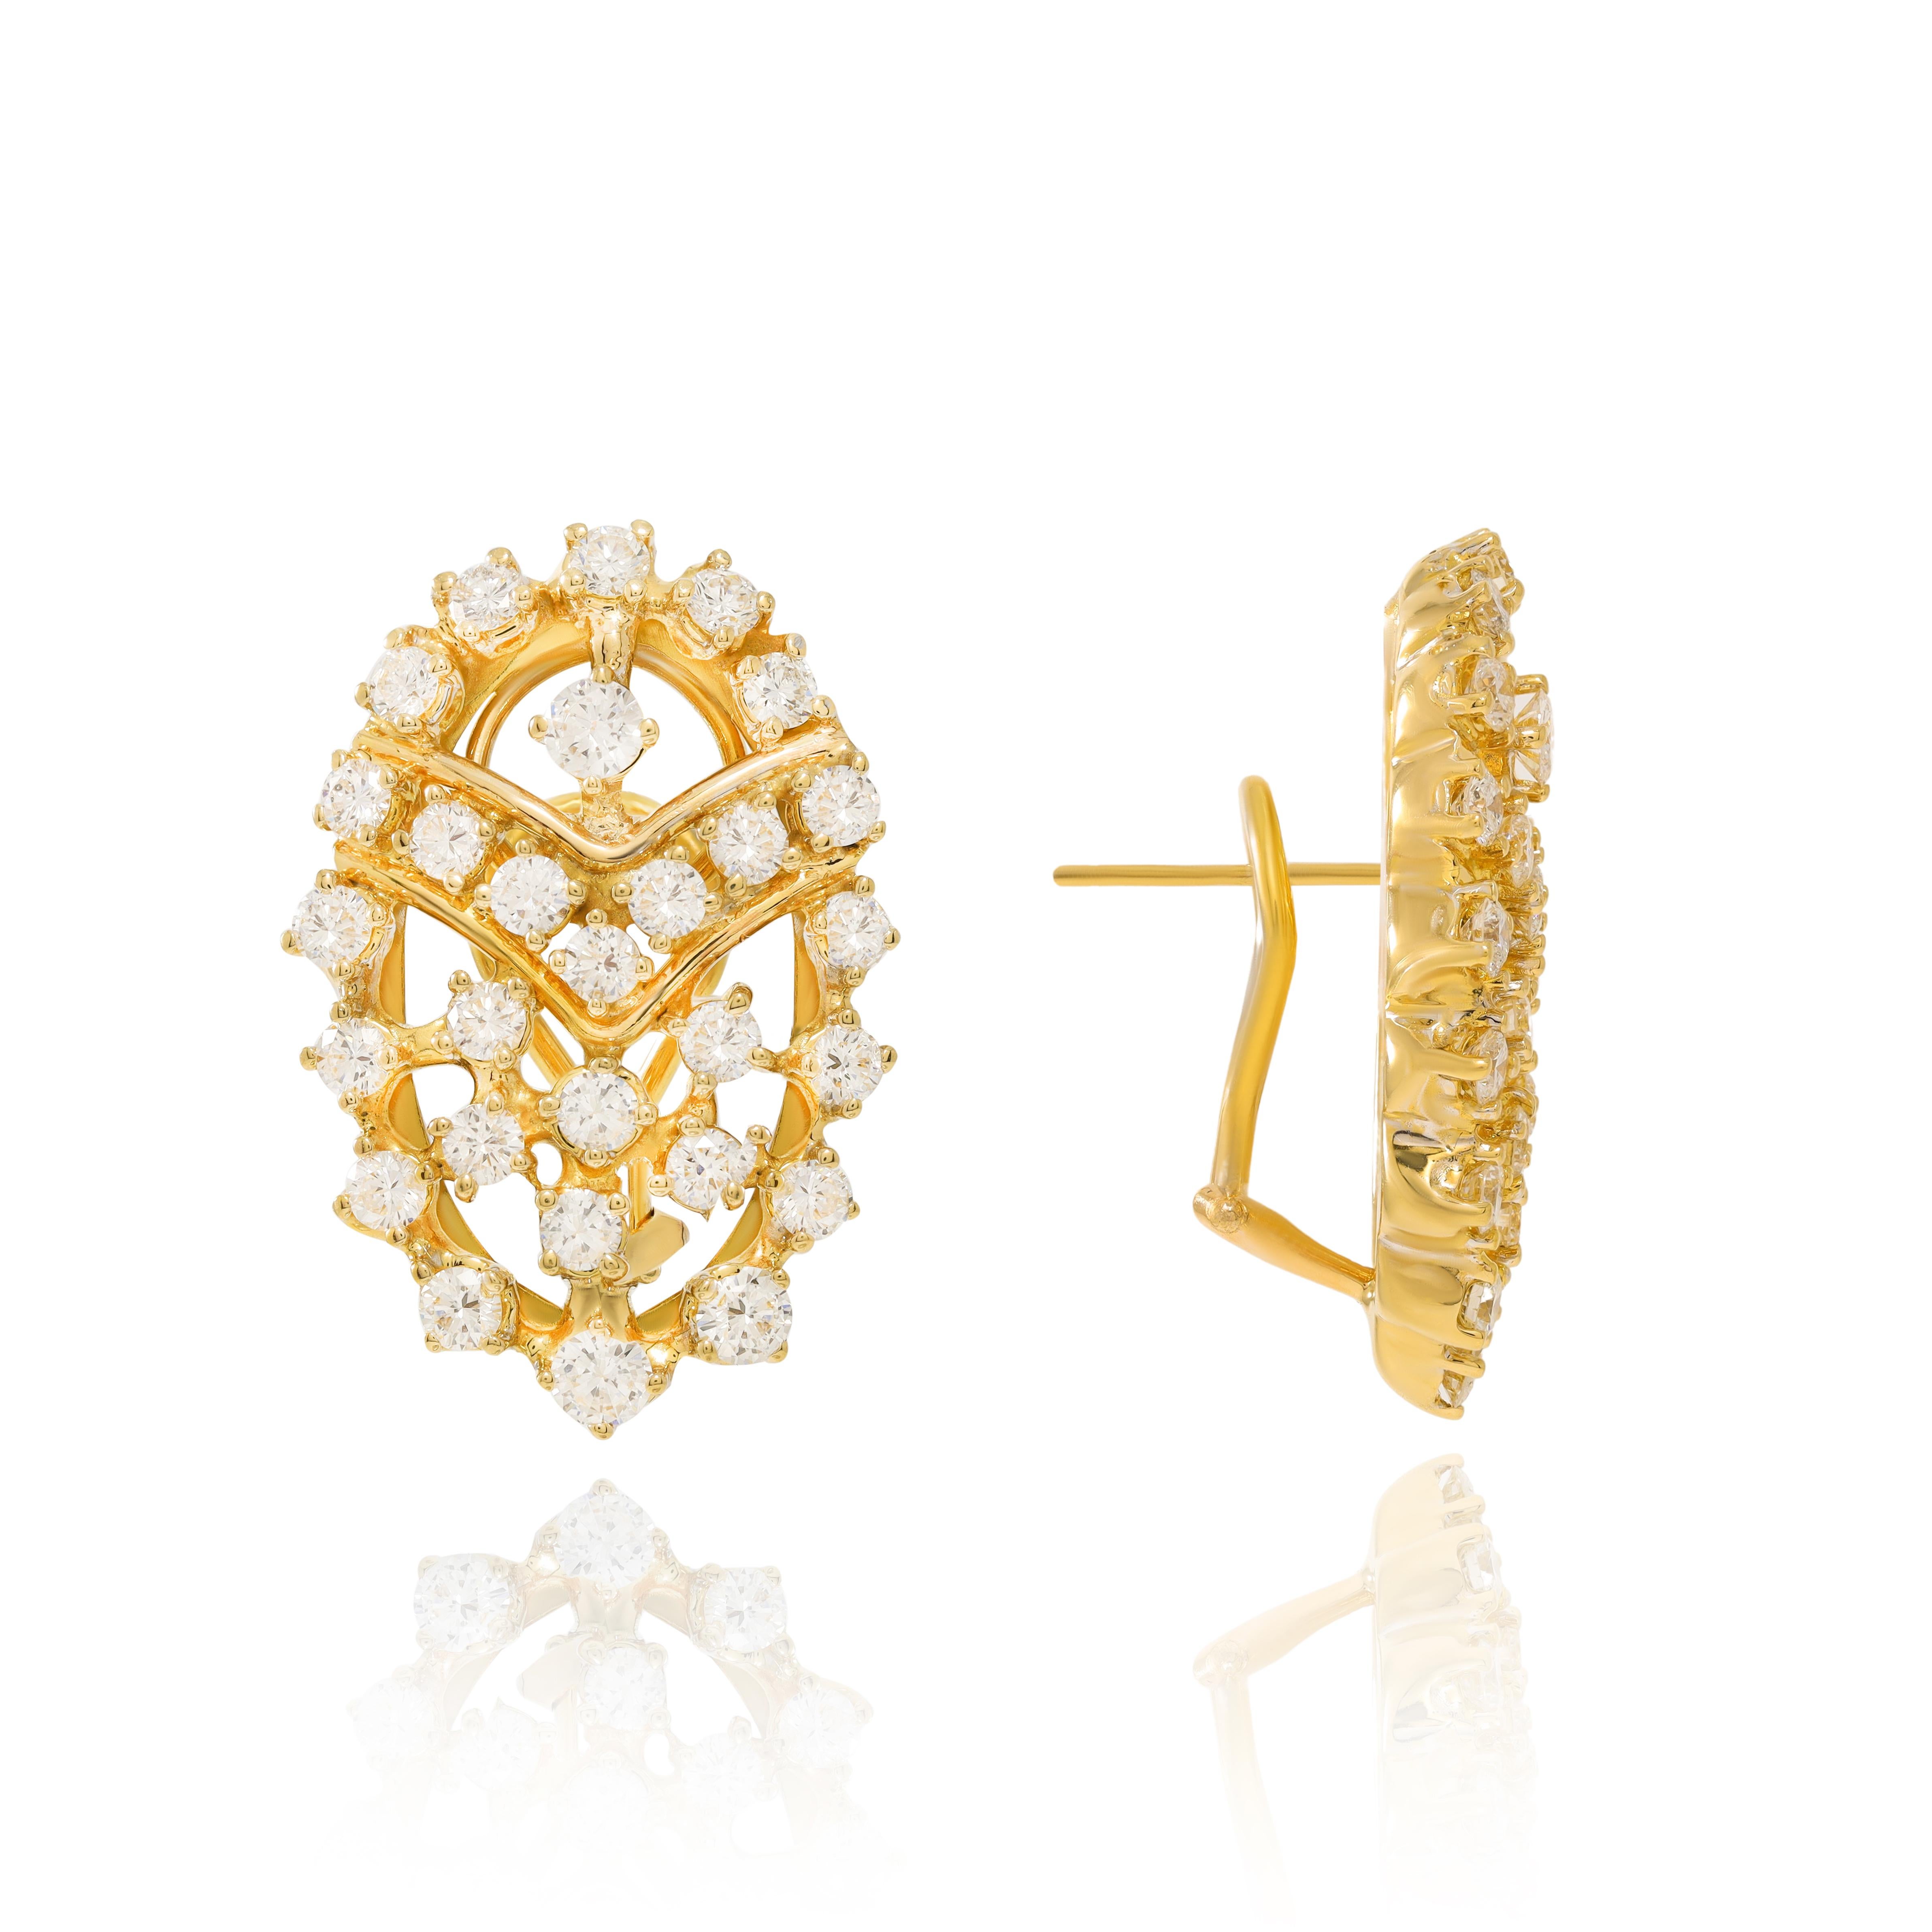 18 kt yellow gold diamond earrings adorned with 5.00 cts tw of diamonds.
Diana M. is a leading supplier of top-quality fine jewelry for over 35 years.
Diana M is one-stop shop for all your jewelry shopping, carrying line of diamond rings, earrings,